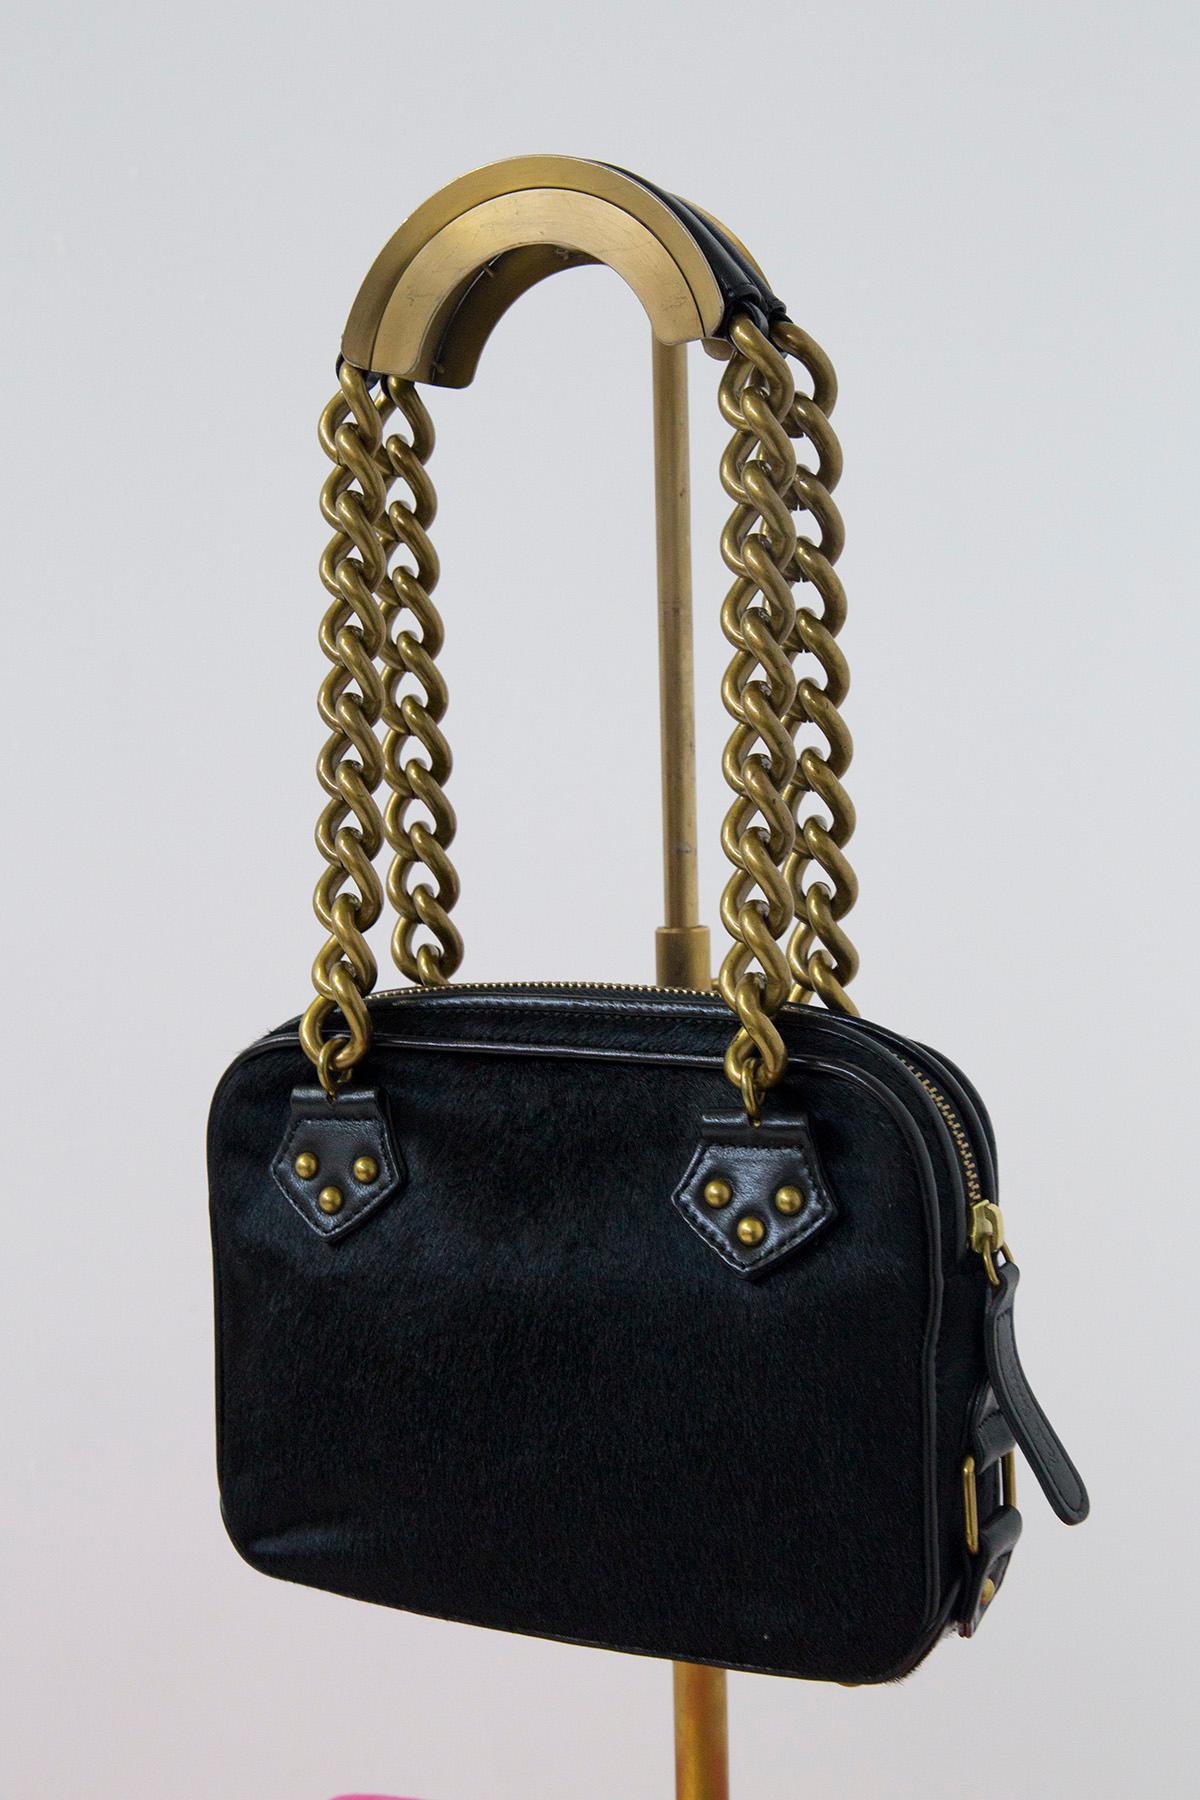 Women's Paul Smith shoulder bag in fur and embellishments For Sale